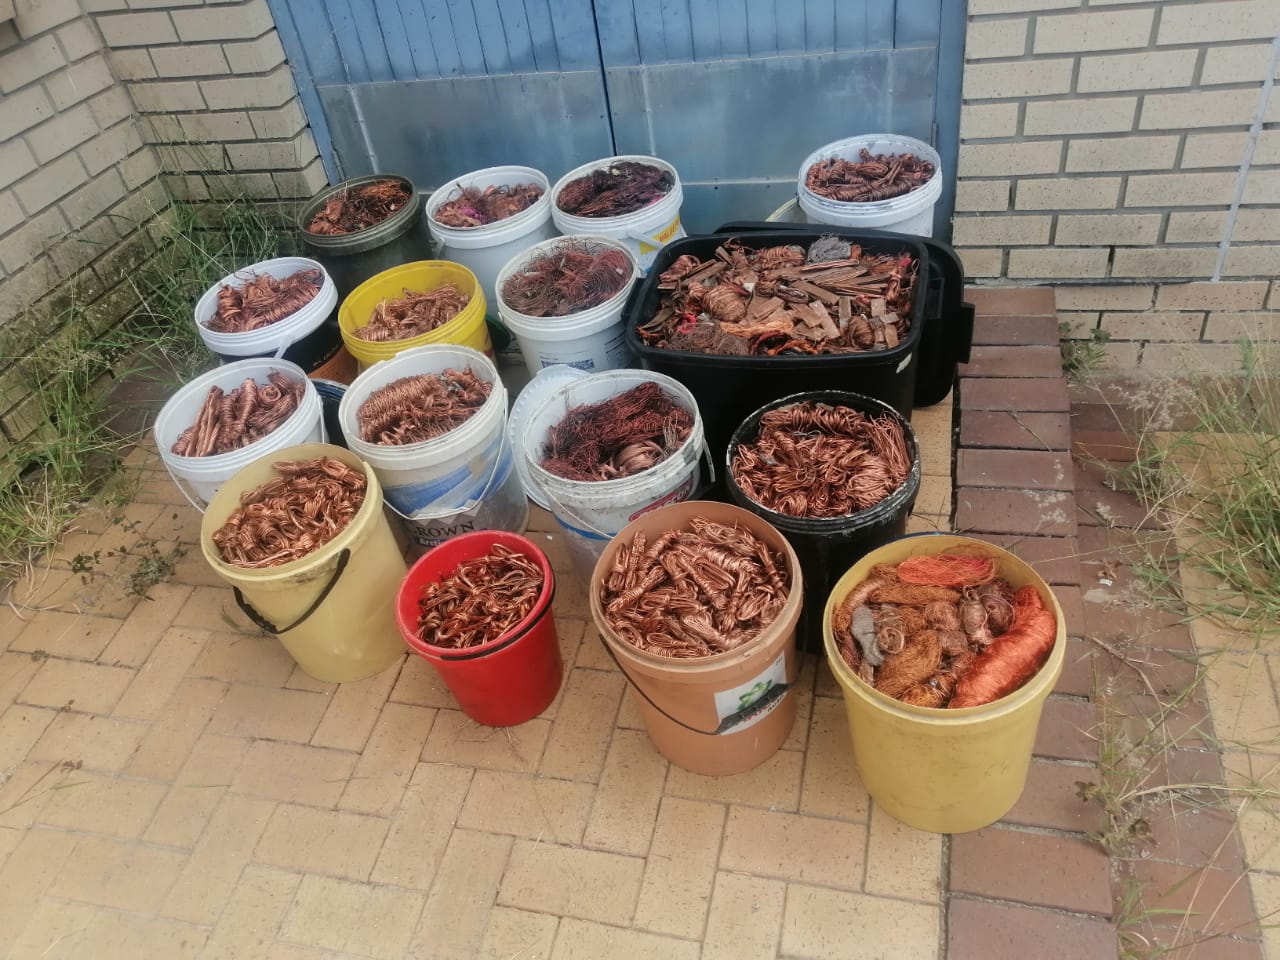 Paarl East police cease copper worth R400 000